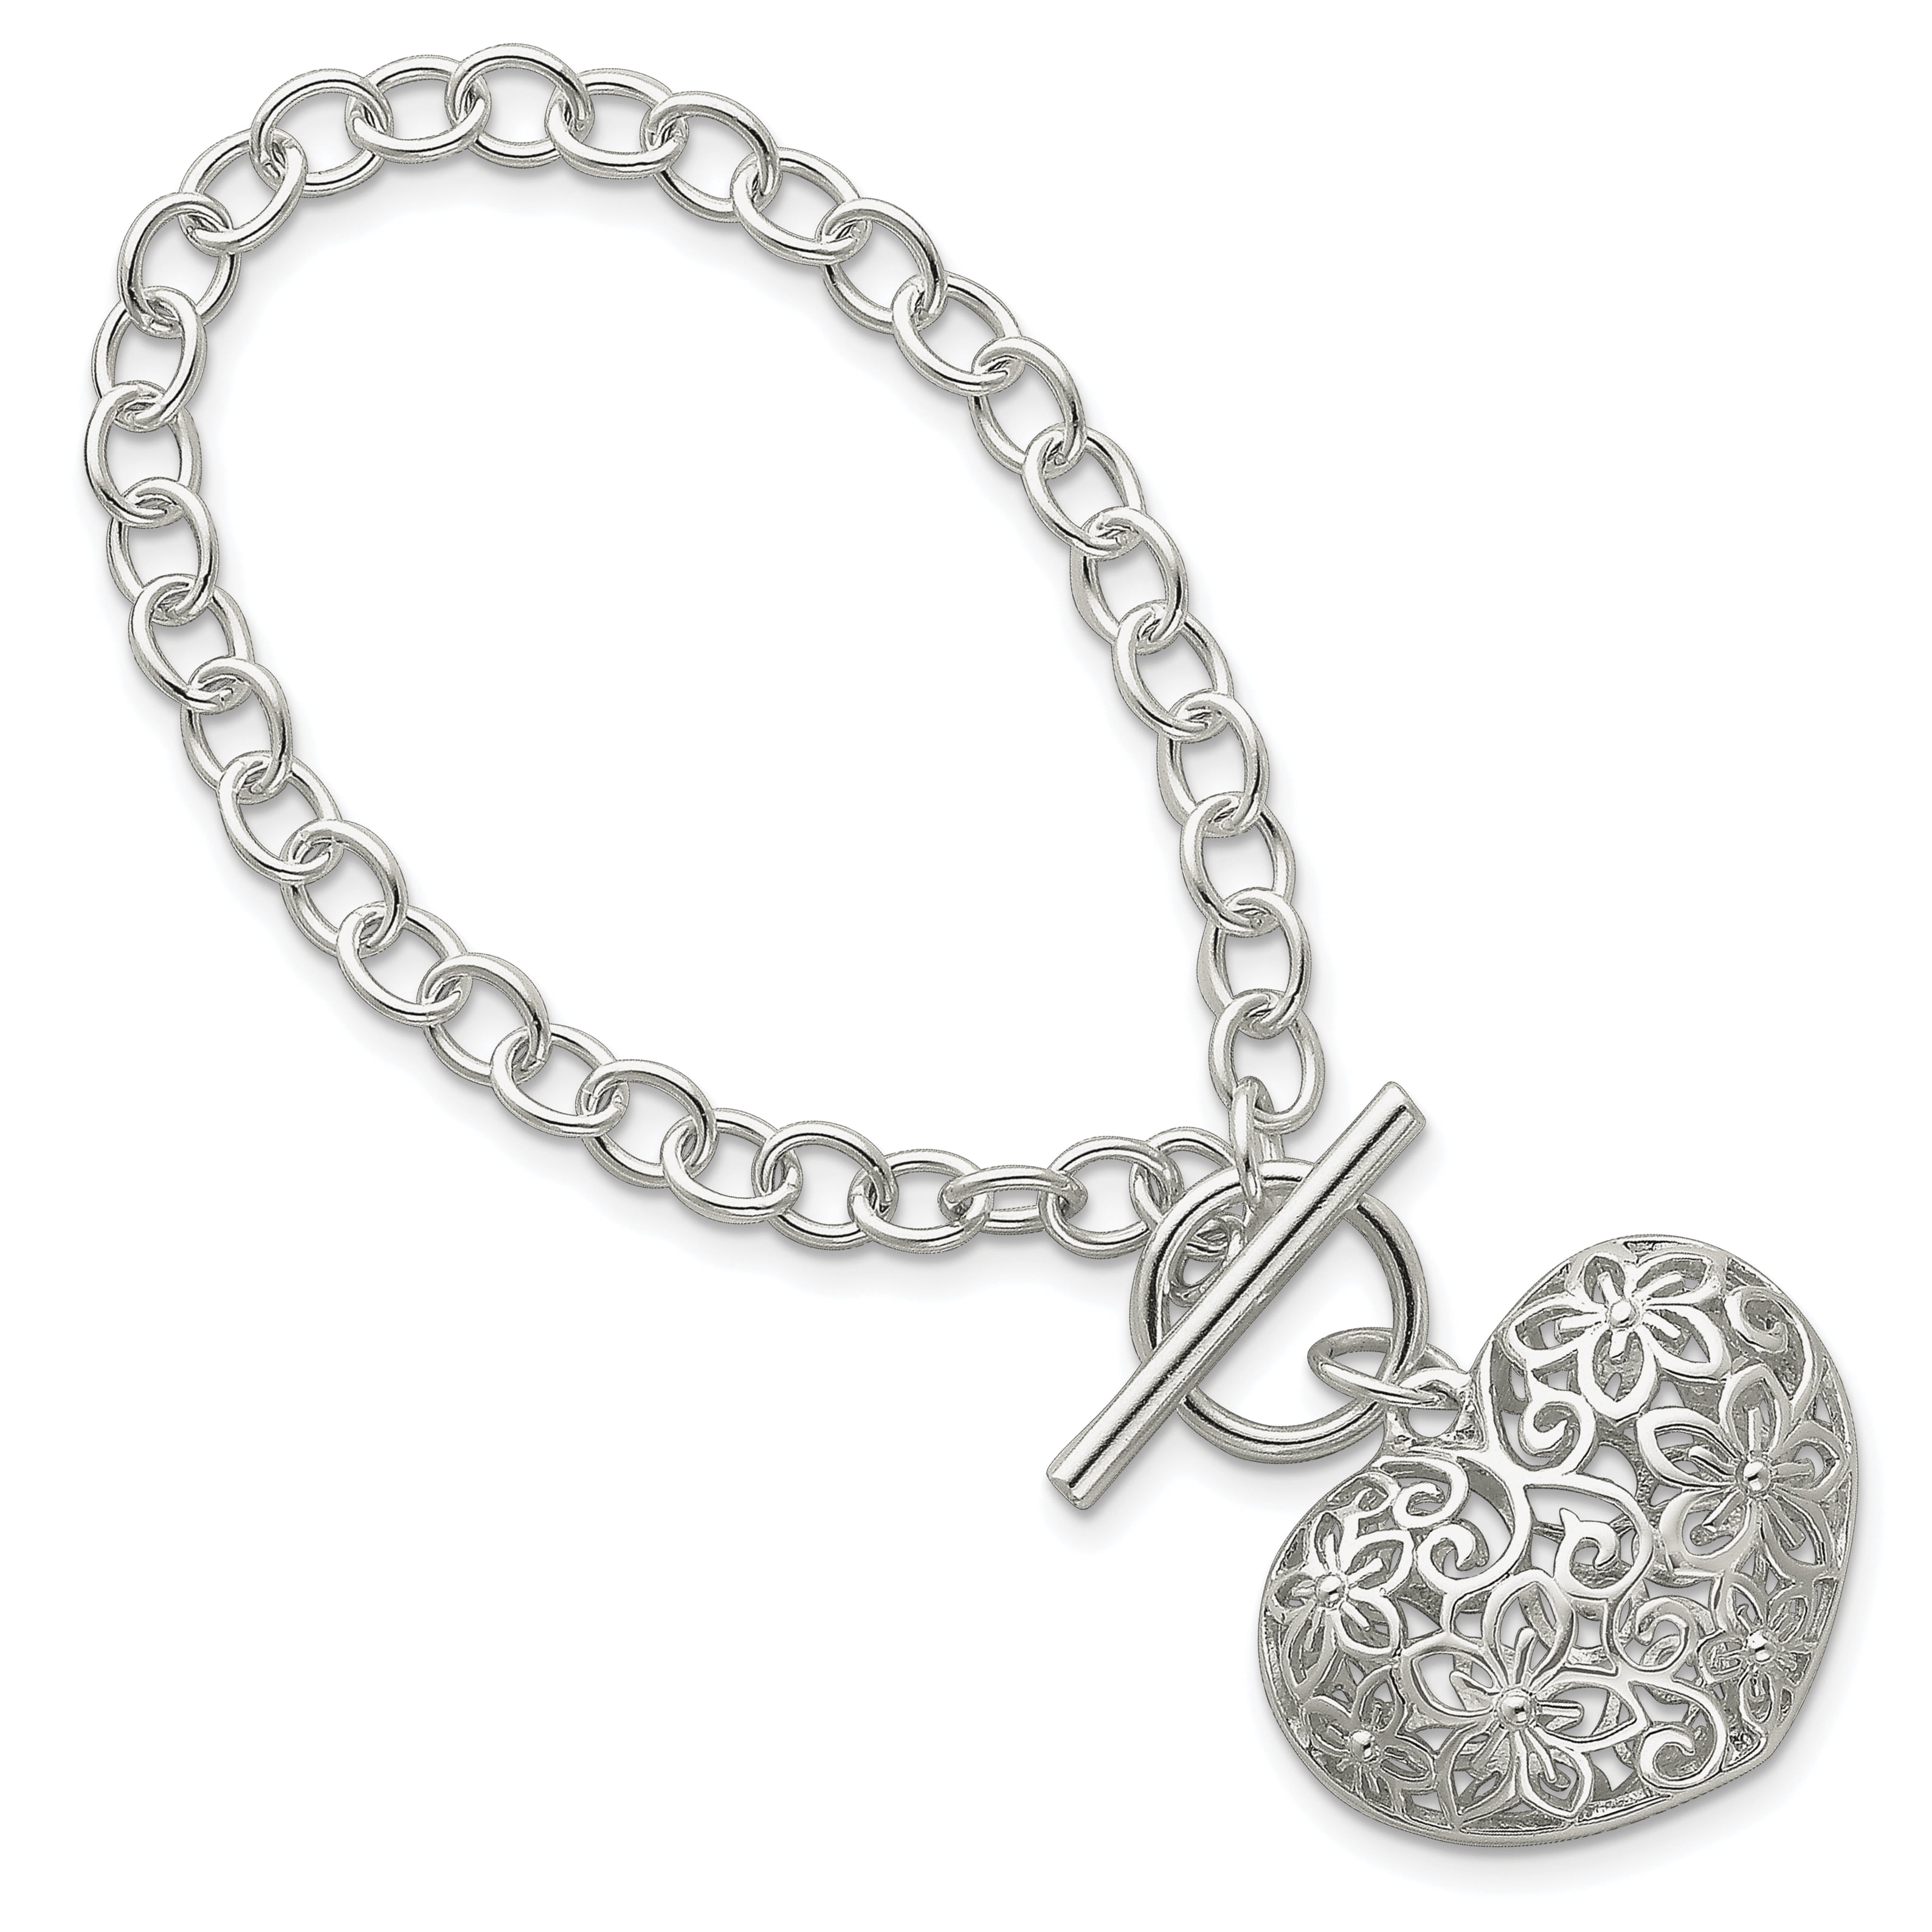 7.5 Toggle Lock For Women and Girls .925 Sterling Silver Heart Charm Bracelet 